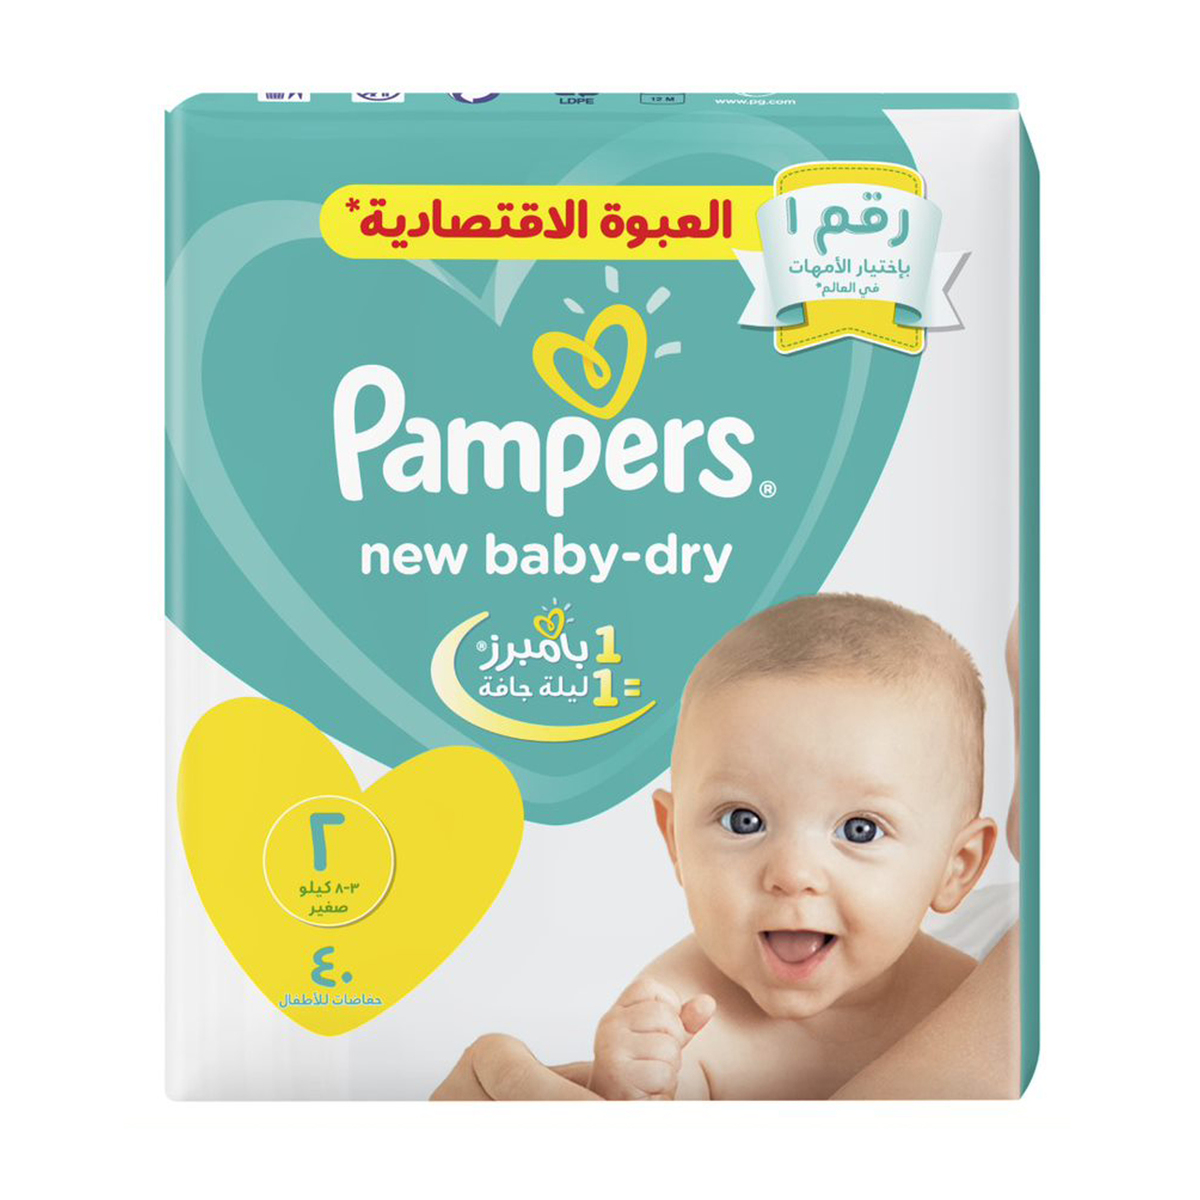 Pampers New Baby Dry Diaper Size 2 3 6kg 40pcs Baby Nappies Lulu Egypt